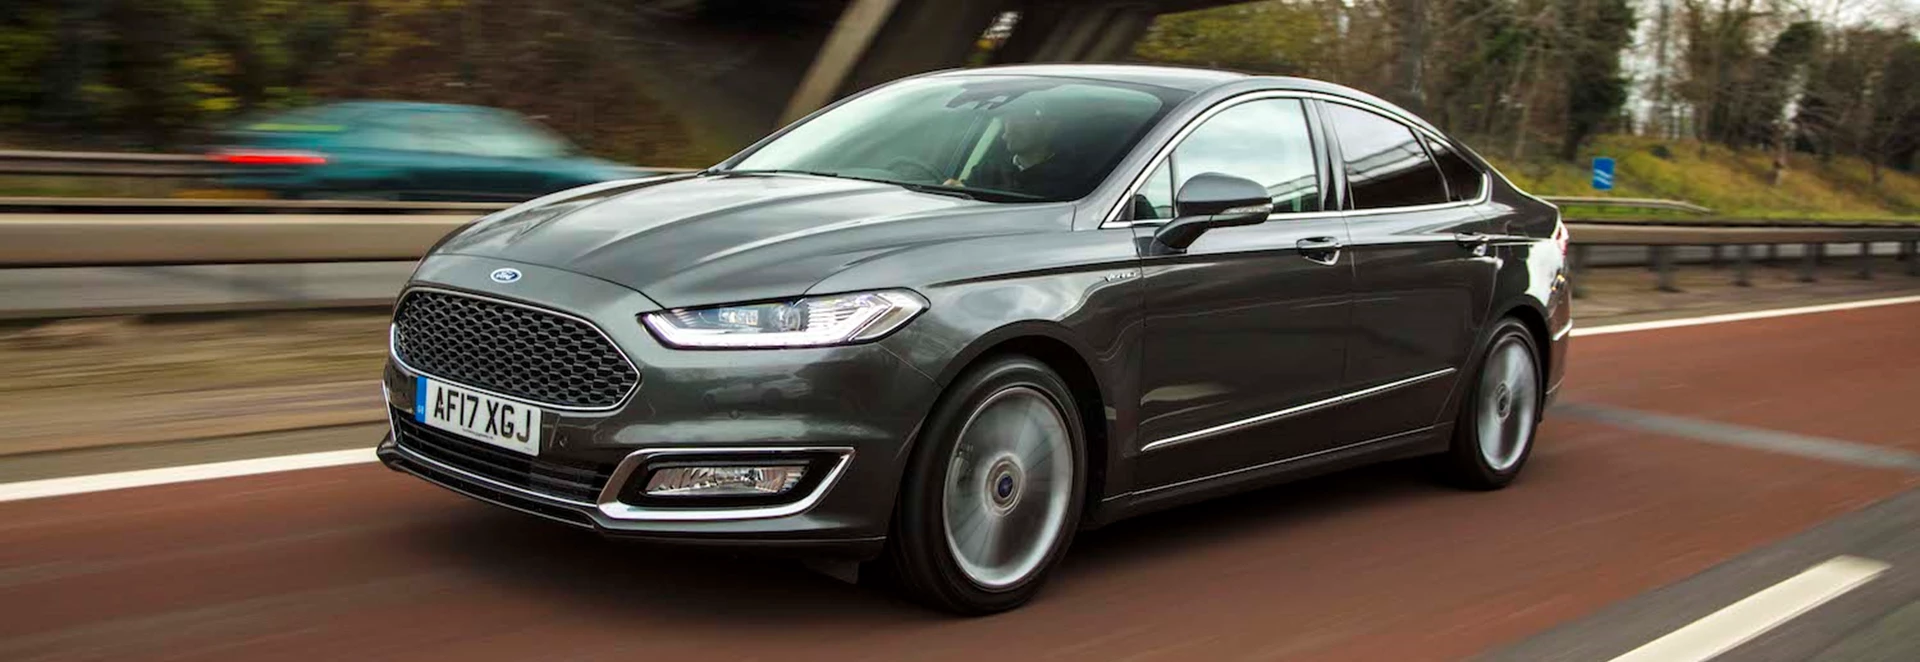 The Ford Mondeo vs Hybrid: Which should you choose? 